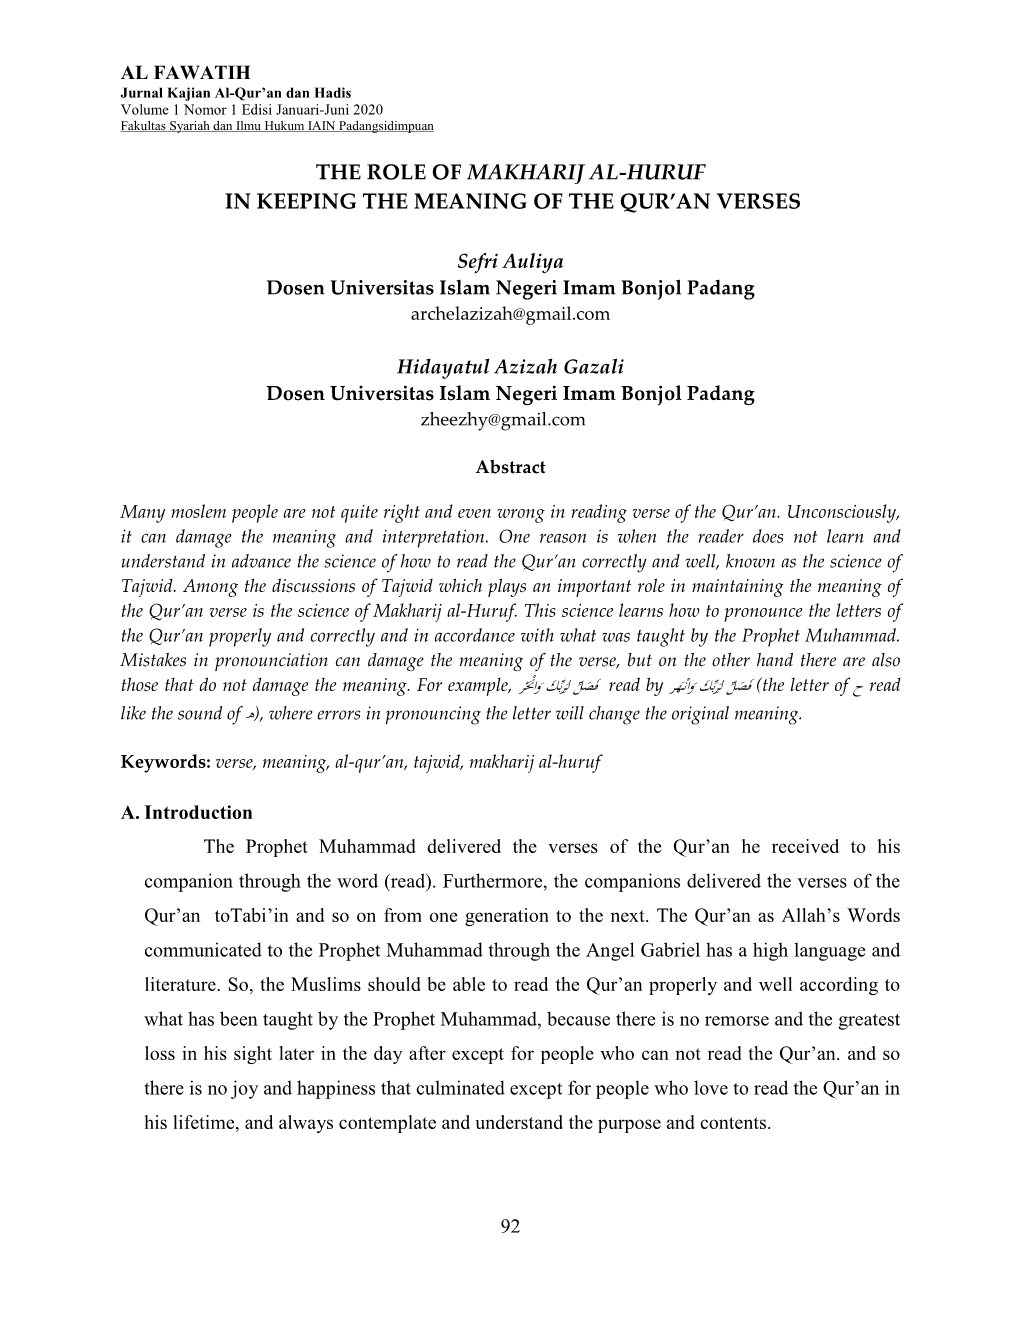 The Role of Makharij Al-Huruf in Keeping the Meaning of the Qur’An Verses